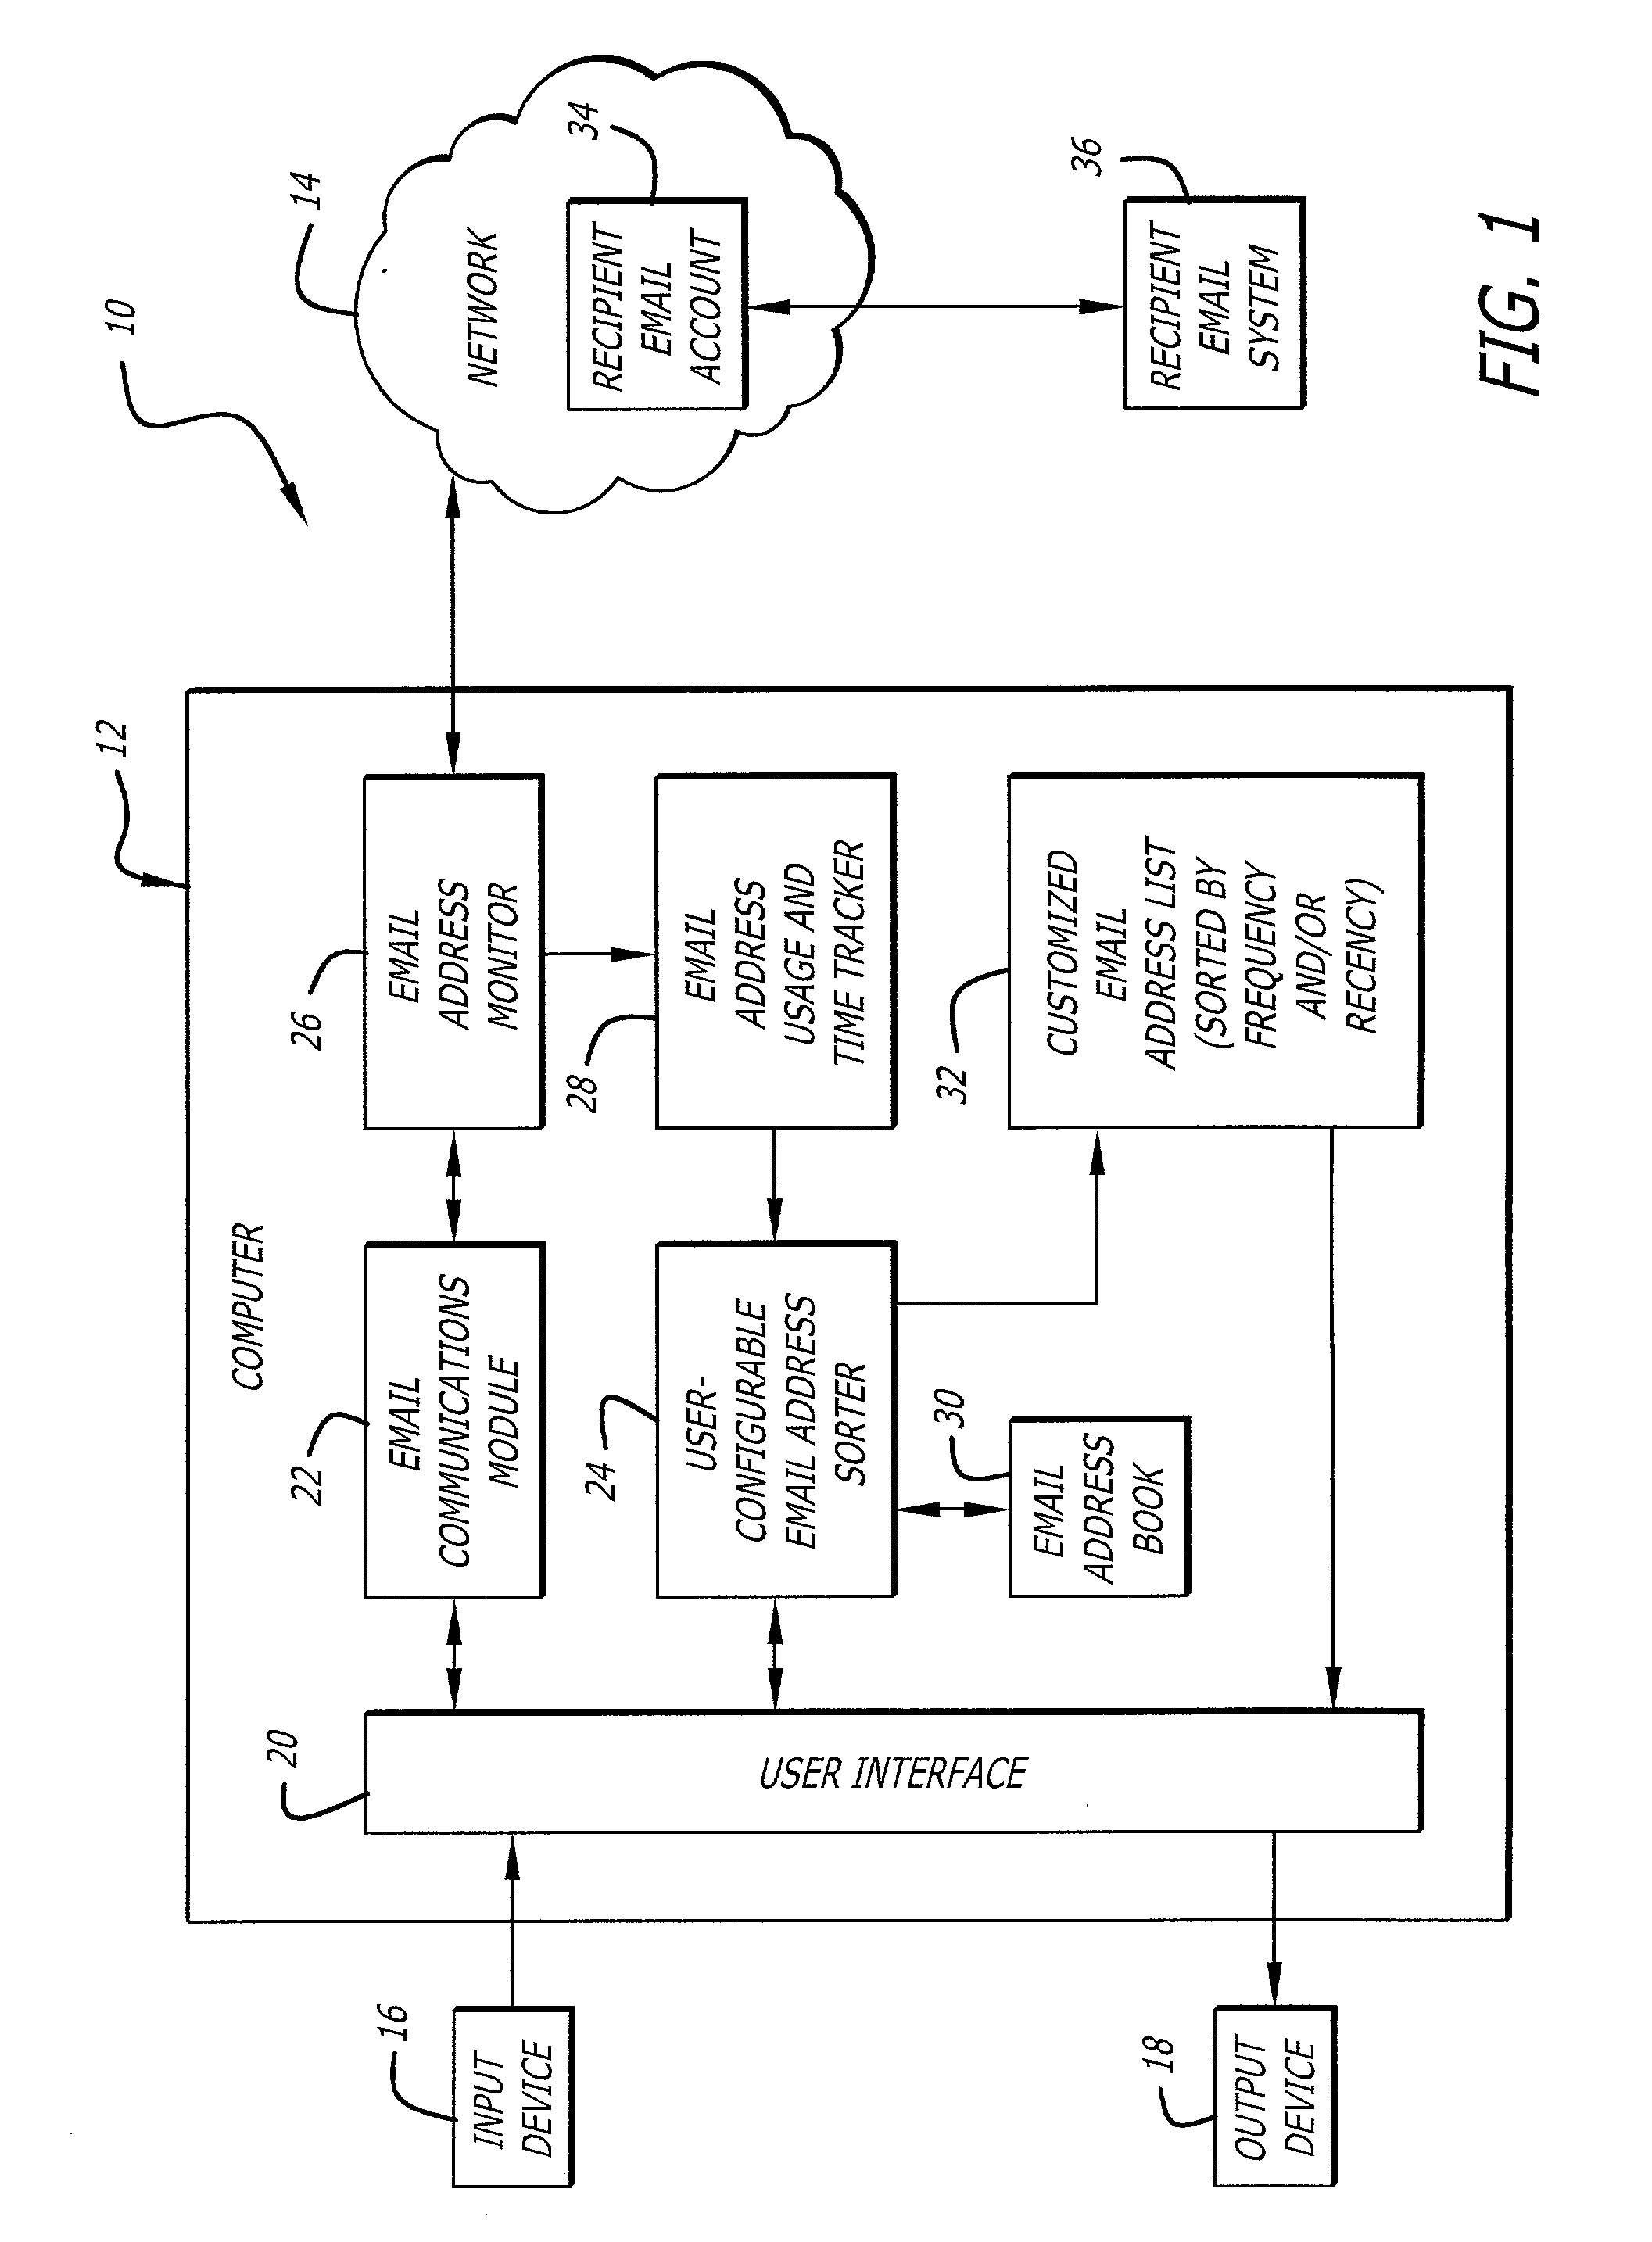 System and method for facilitating email communications by providing convenient access to most recently and/or frequently used email addresses